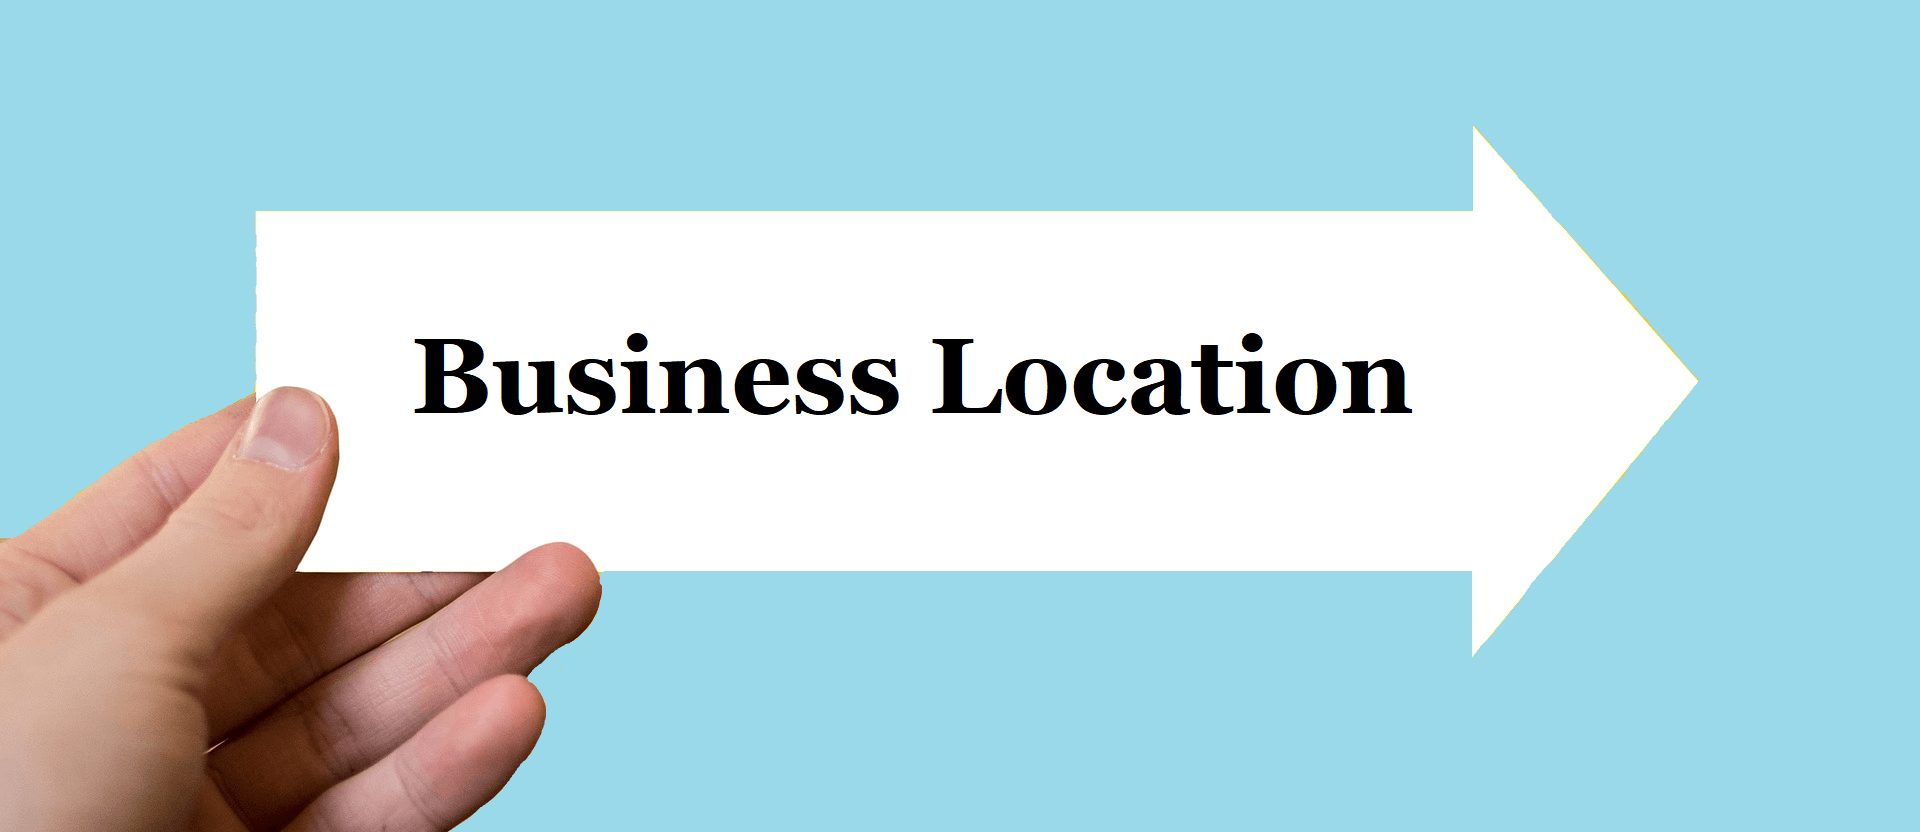 Select a business location for the business setup in dubai